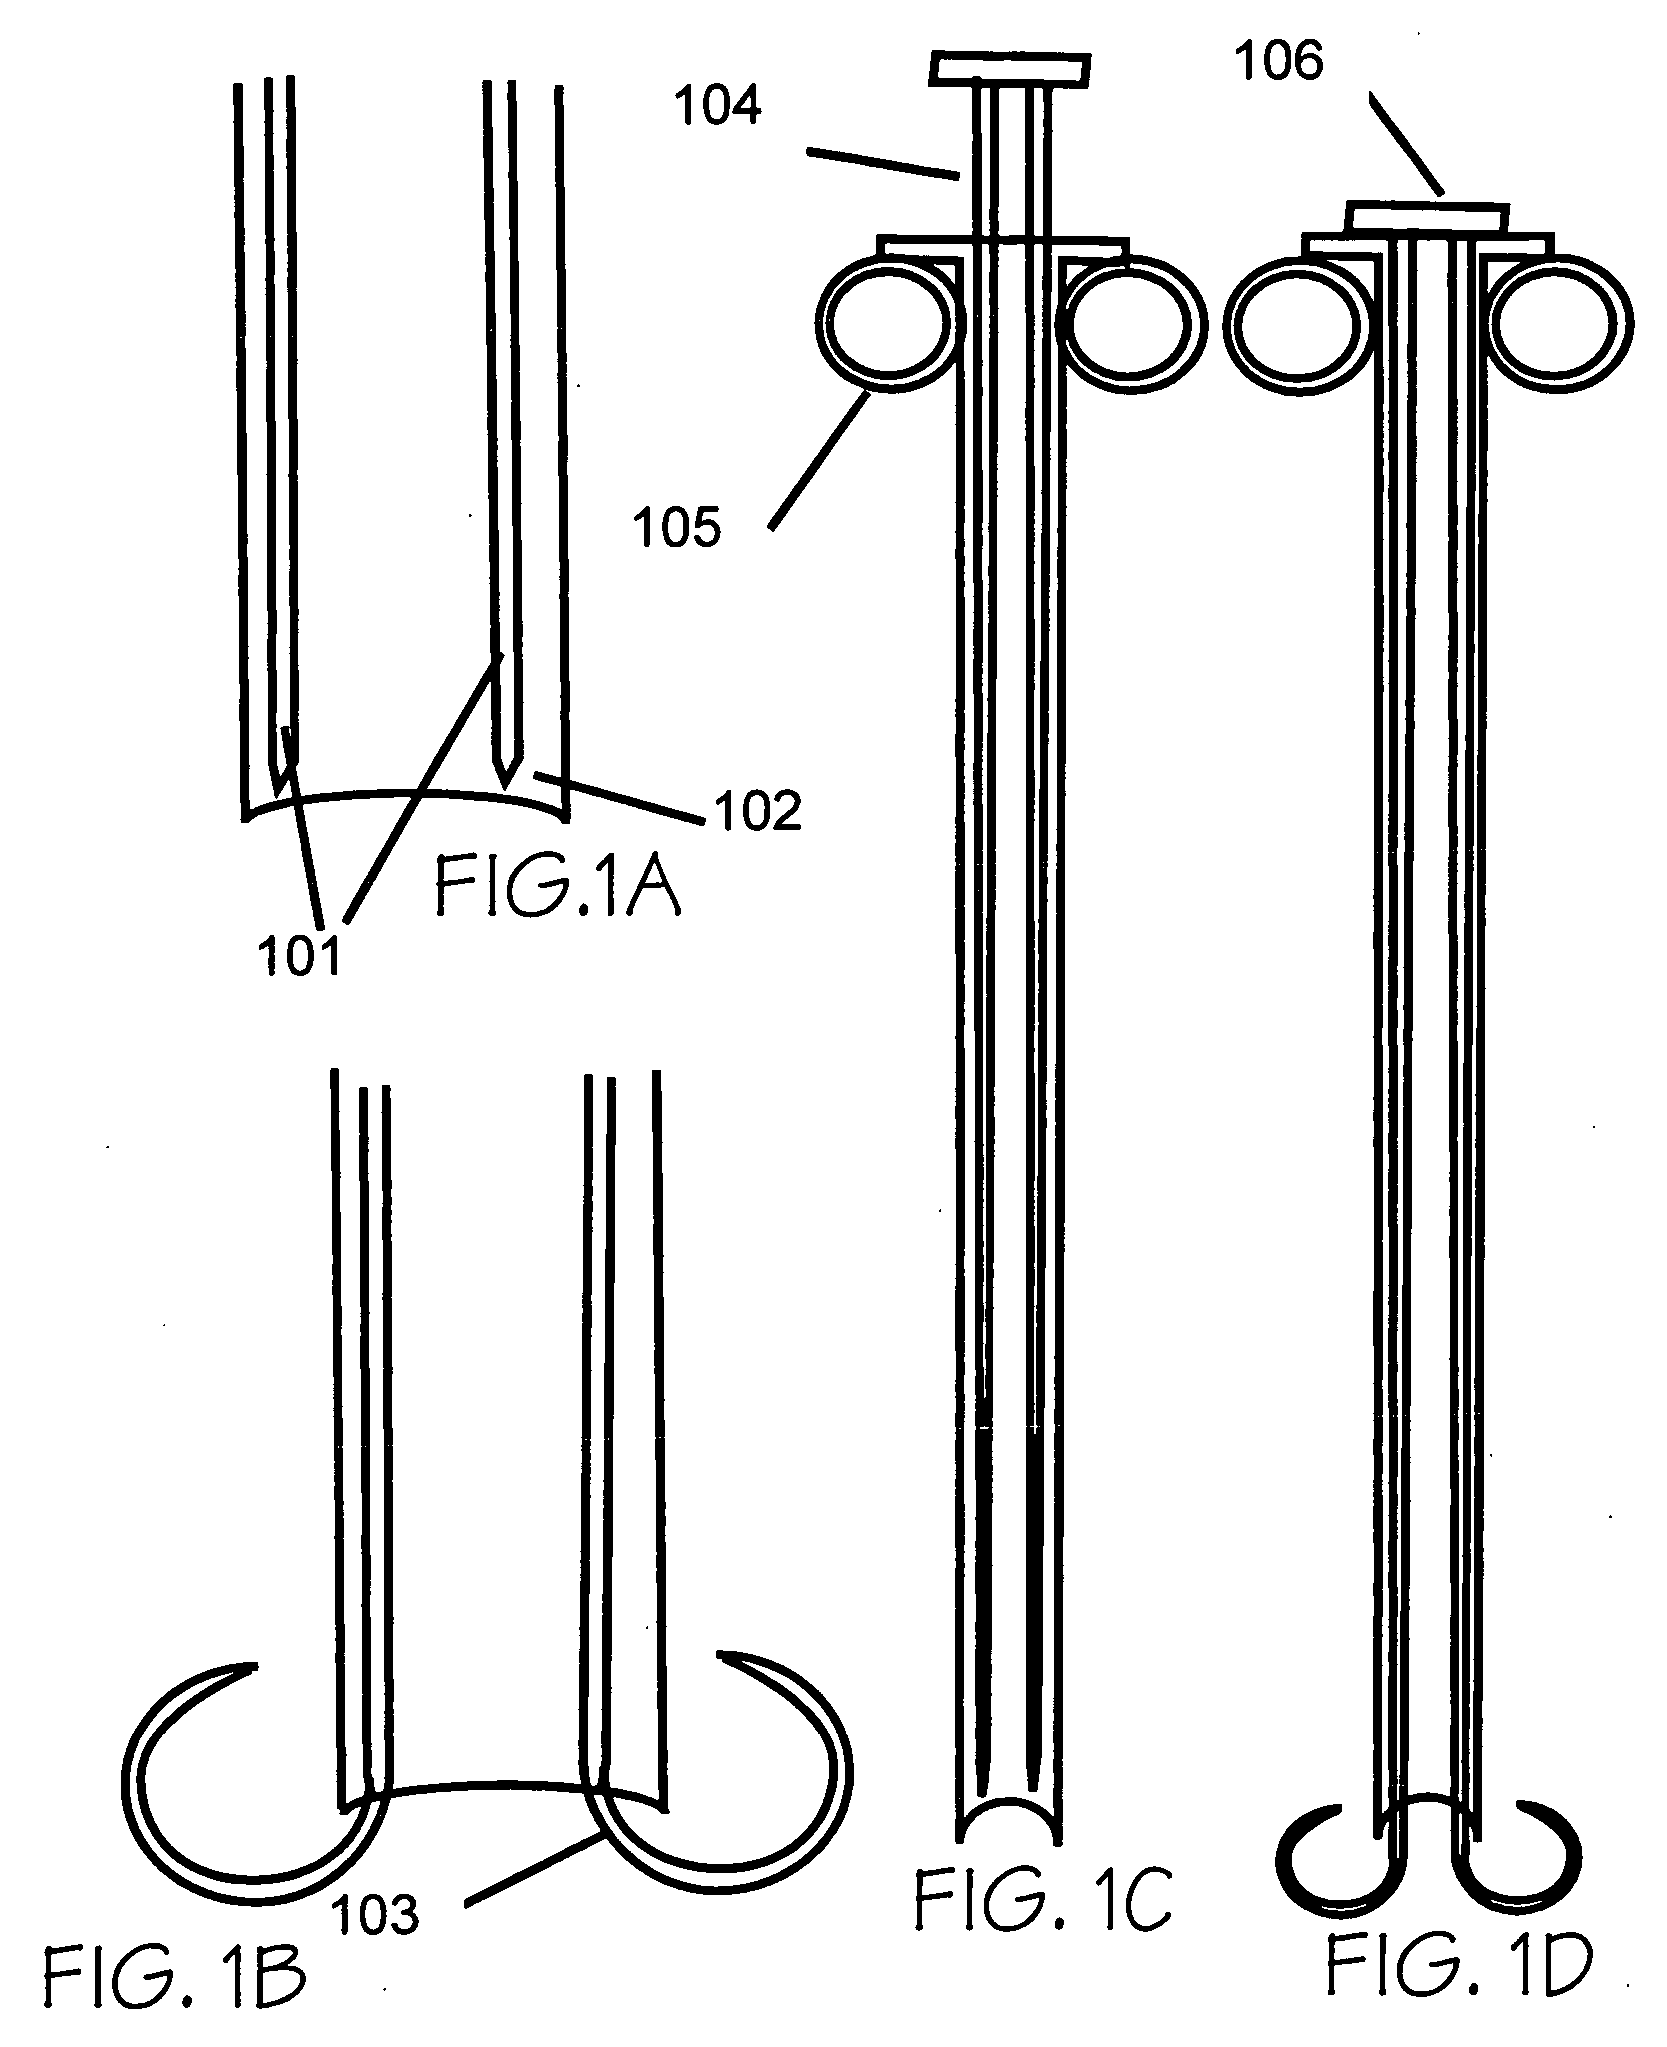 Vascular opening edge eversion methods and apparatuses